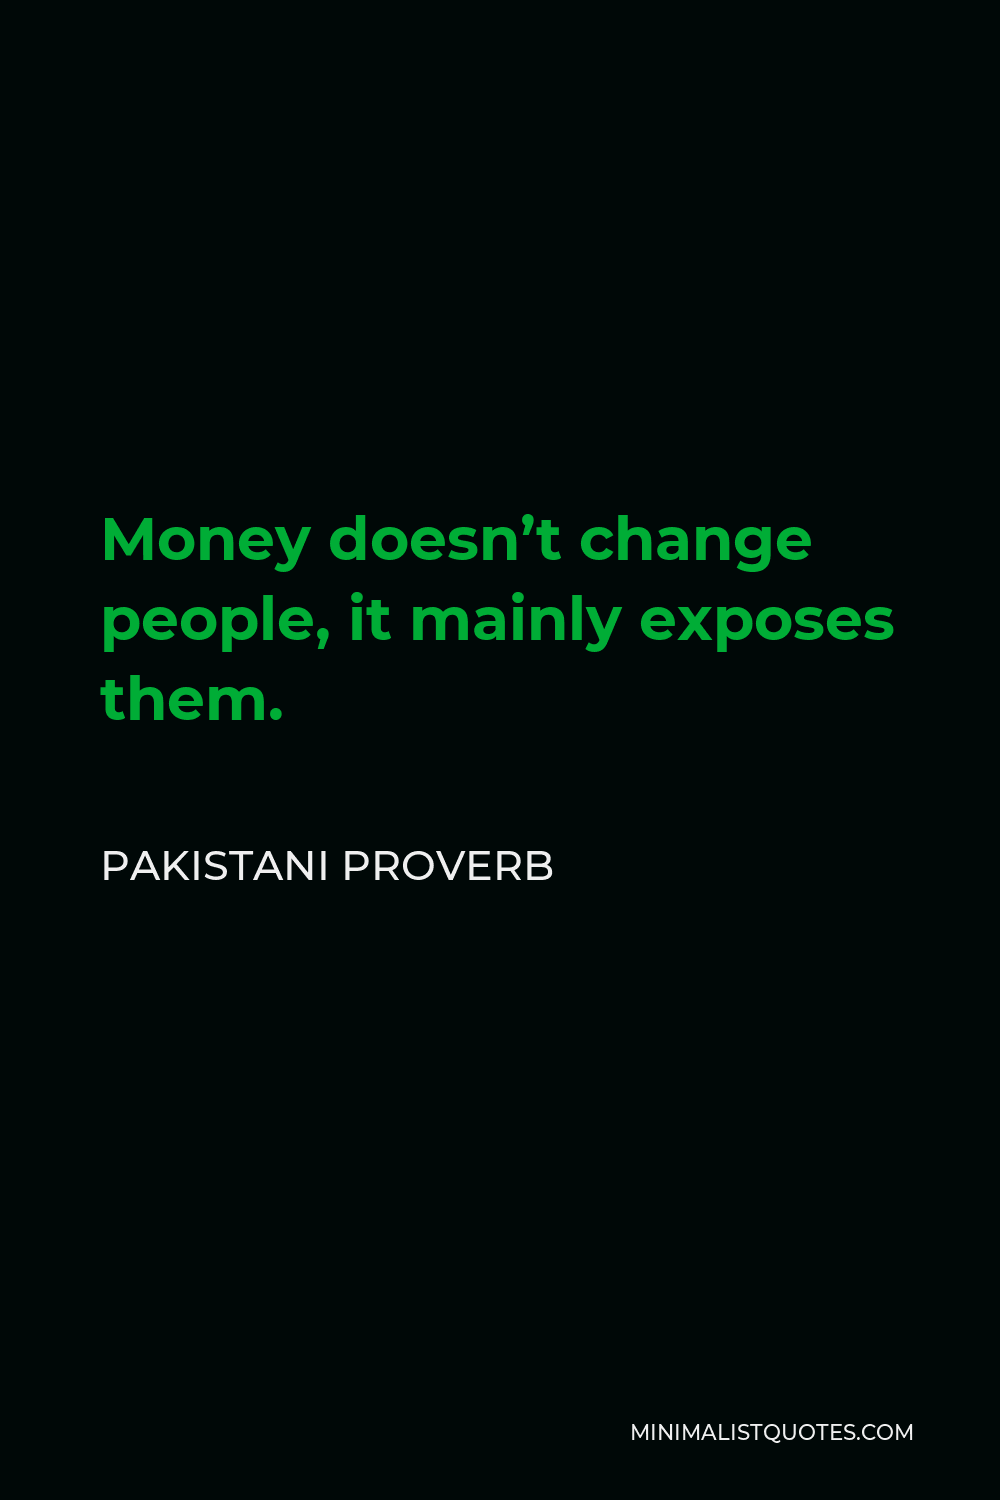 Pakistani Proverb Quote - Money doesn’t change people, it mainly exposes them.